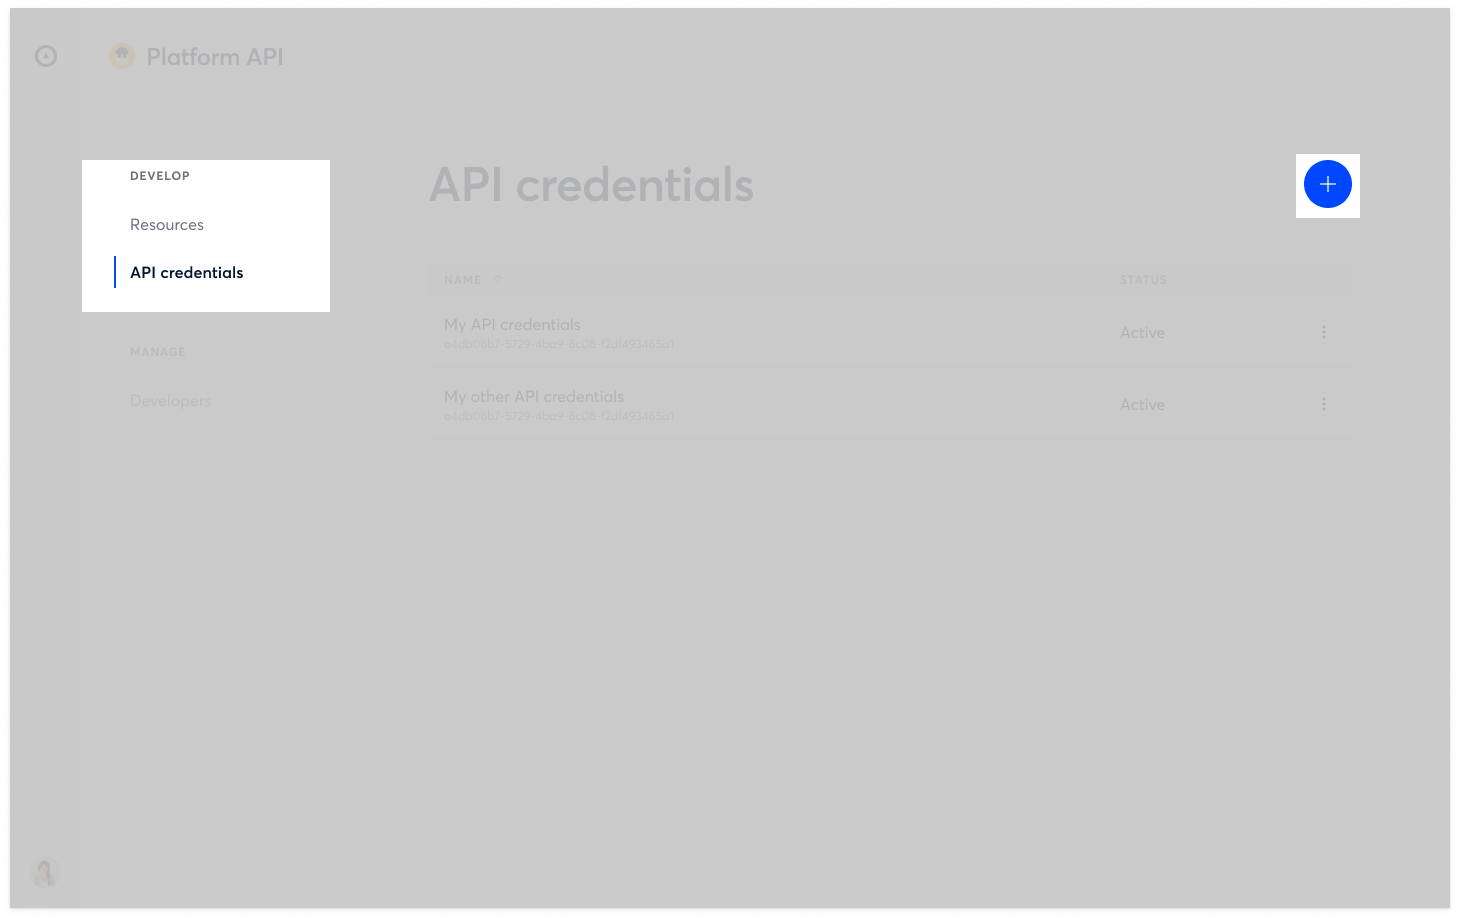 Use the API credentials section to manage your credentials